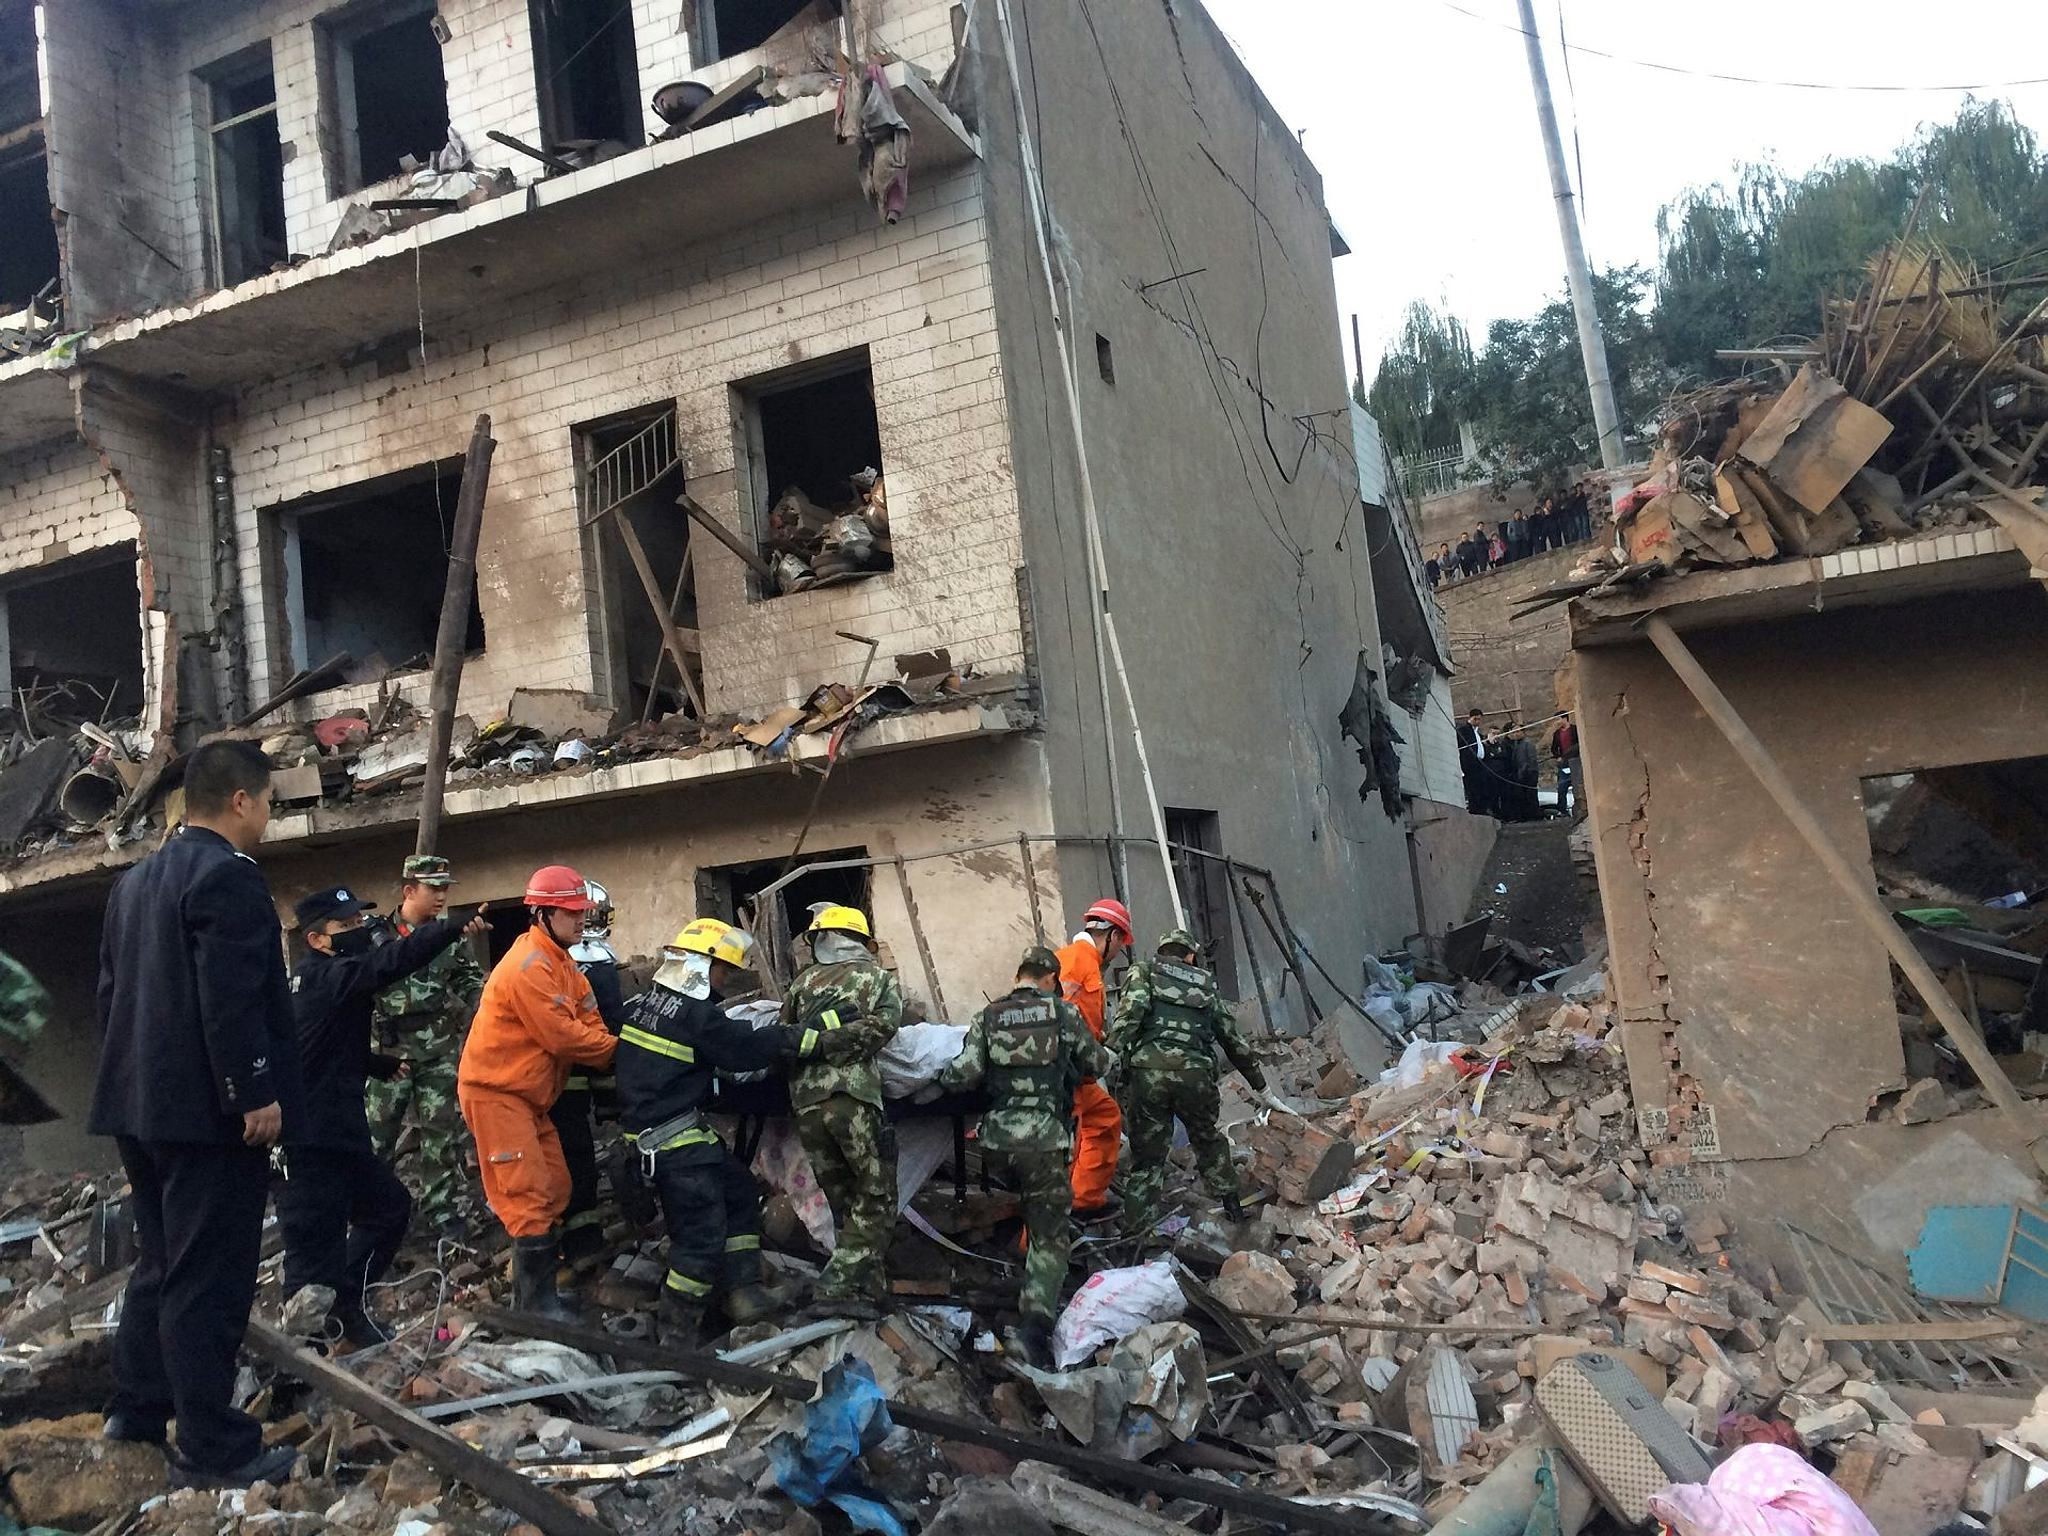 Rescue workers search at site after an explosion hit a town in Fugu county, Shaanxi province, China, October 24, 2016. (China Daily/via REUTERS)